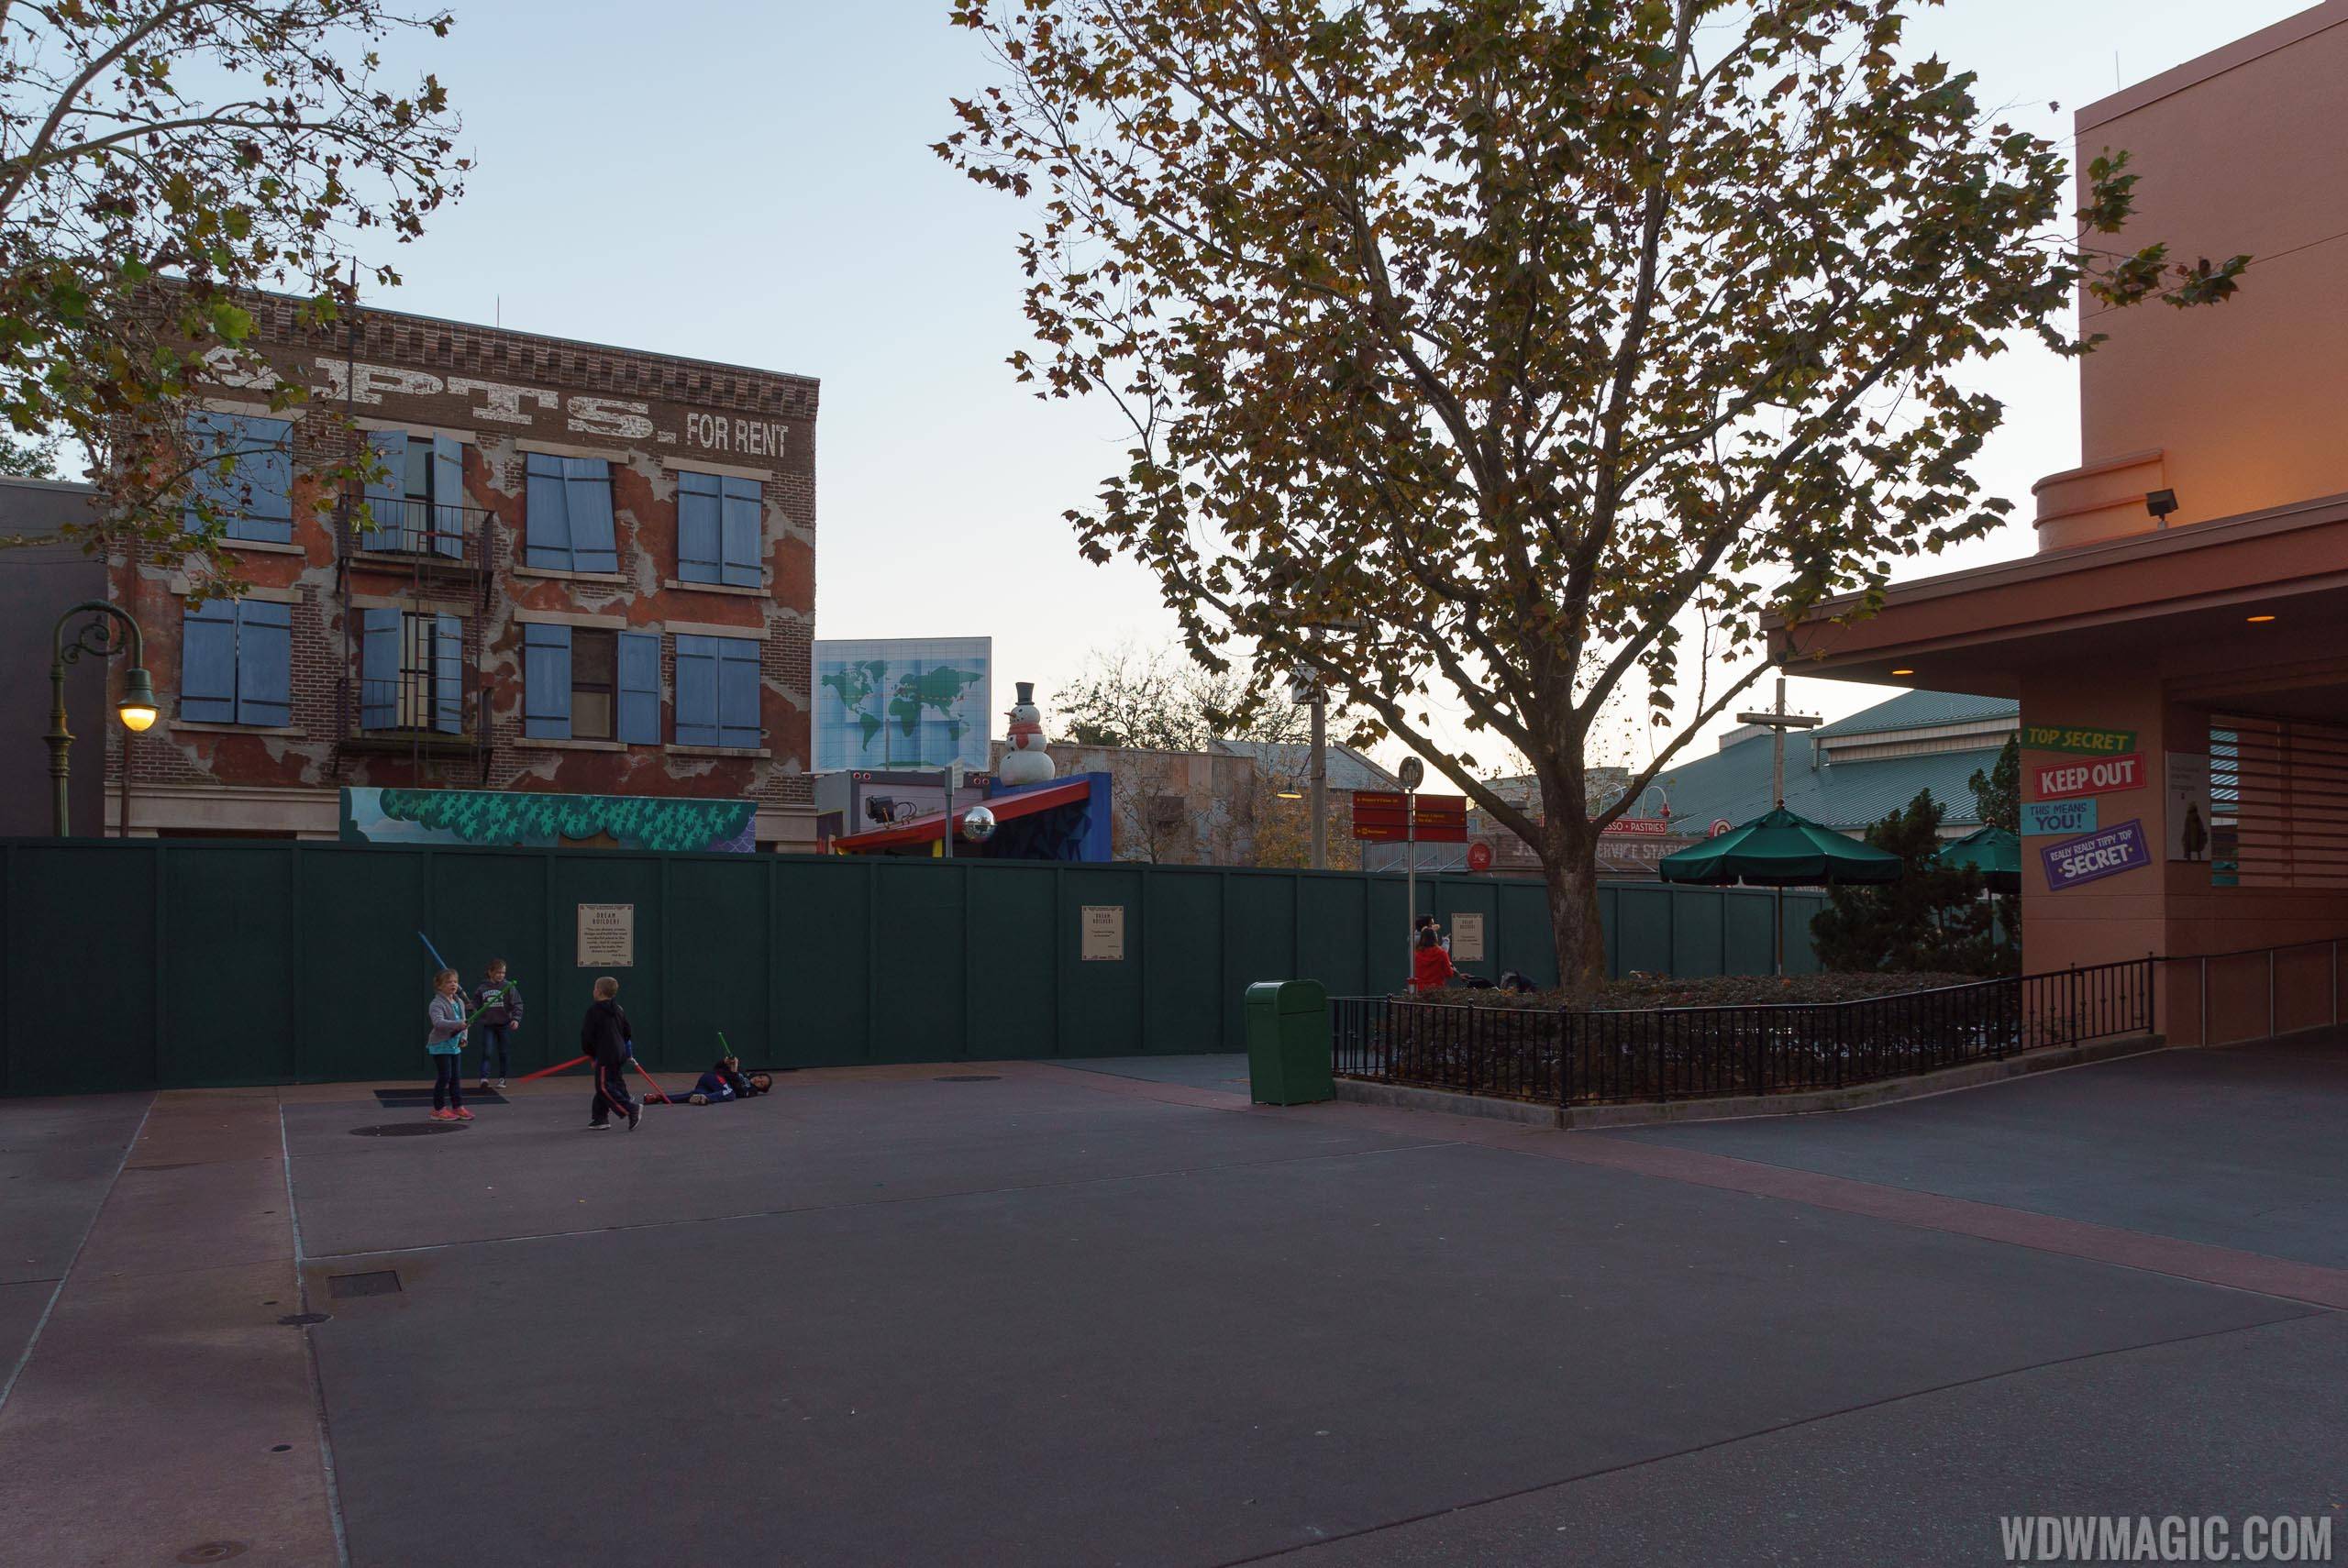 PHOTOS - Construction walls now block off the back section of Streets of America at Disney's Hollywood Studios